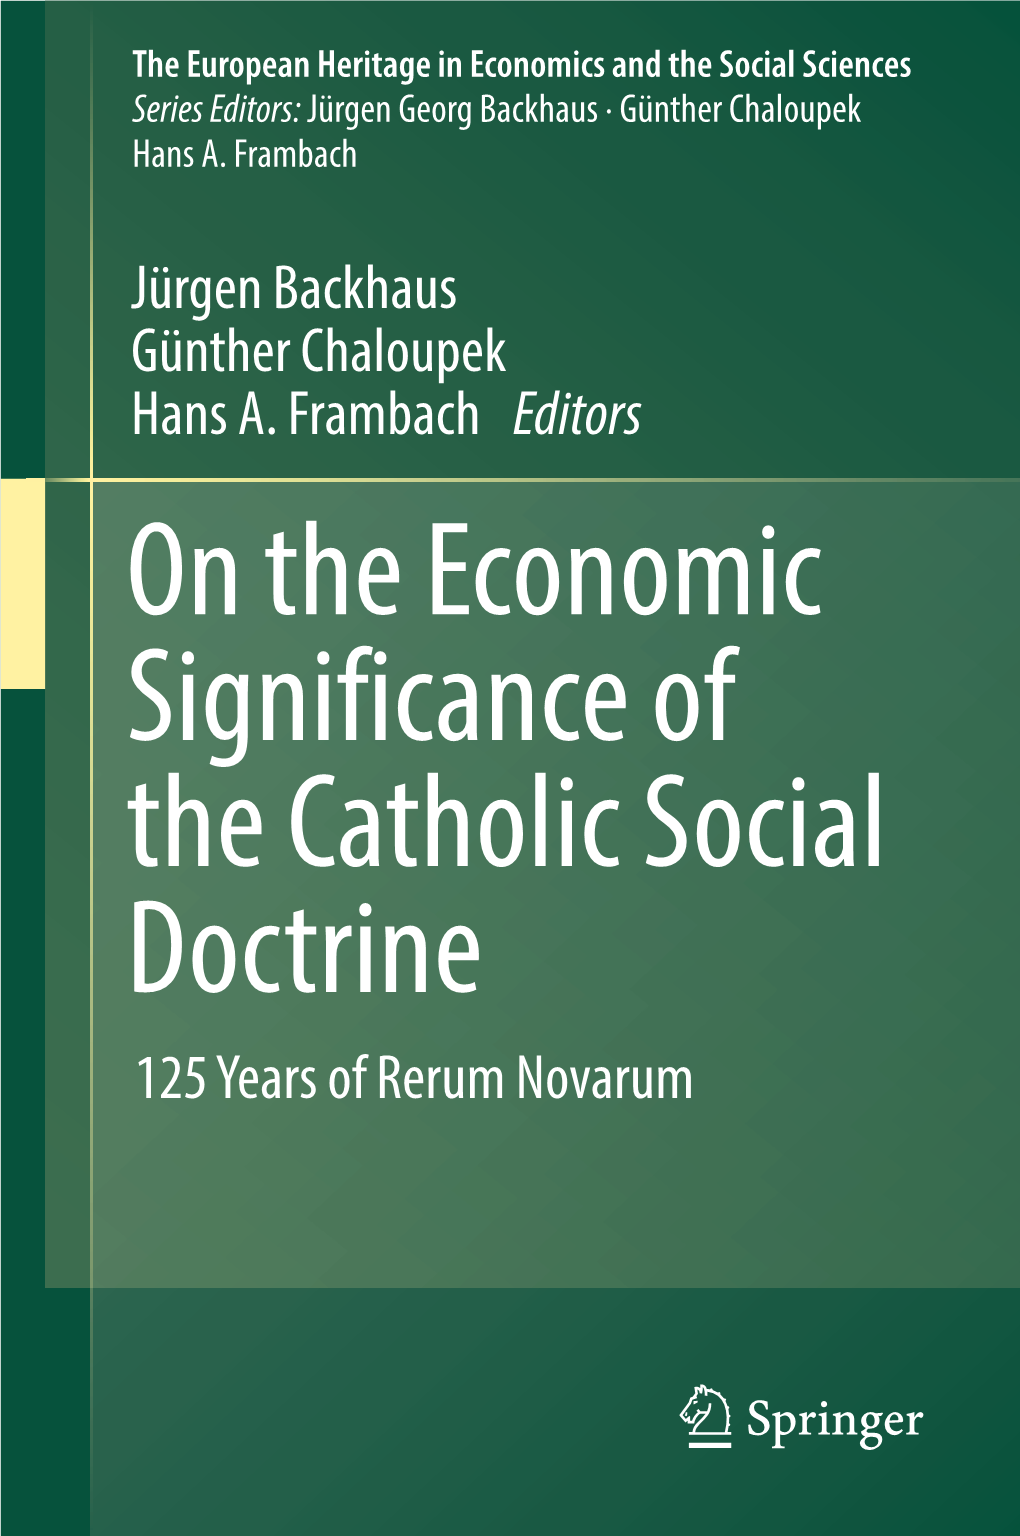 On the Economic Significance of the Catholic Social Doctrine 125 Years of Rerum Novarum the European Heritage in Economics and the Social Sciences